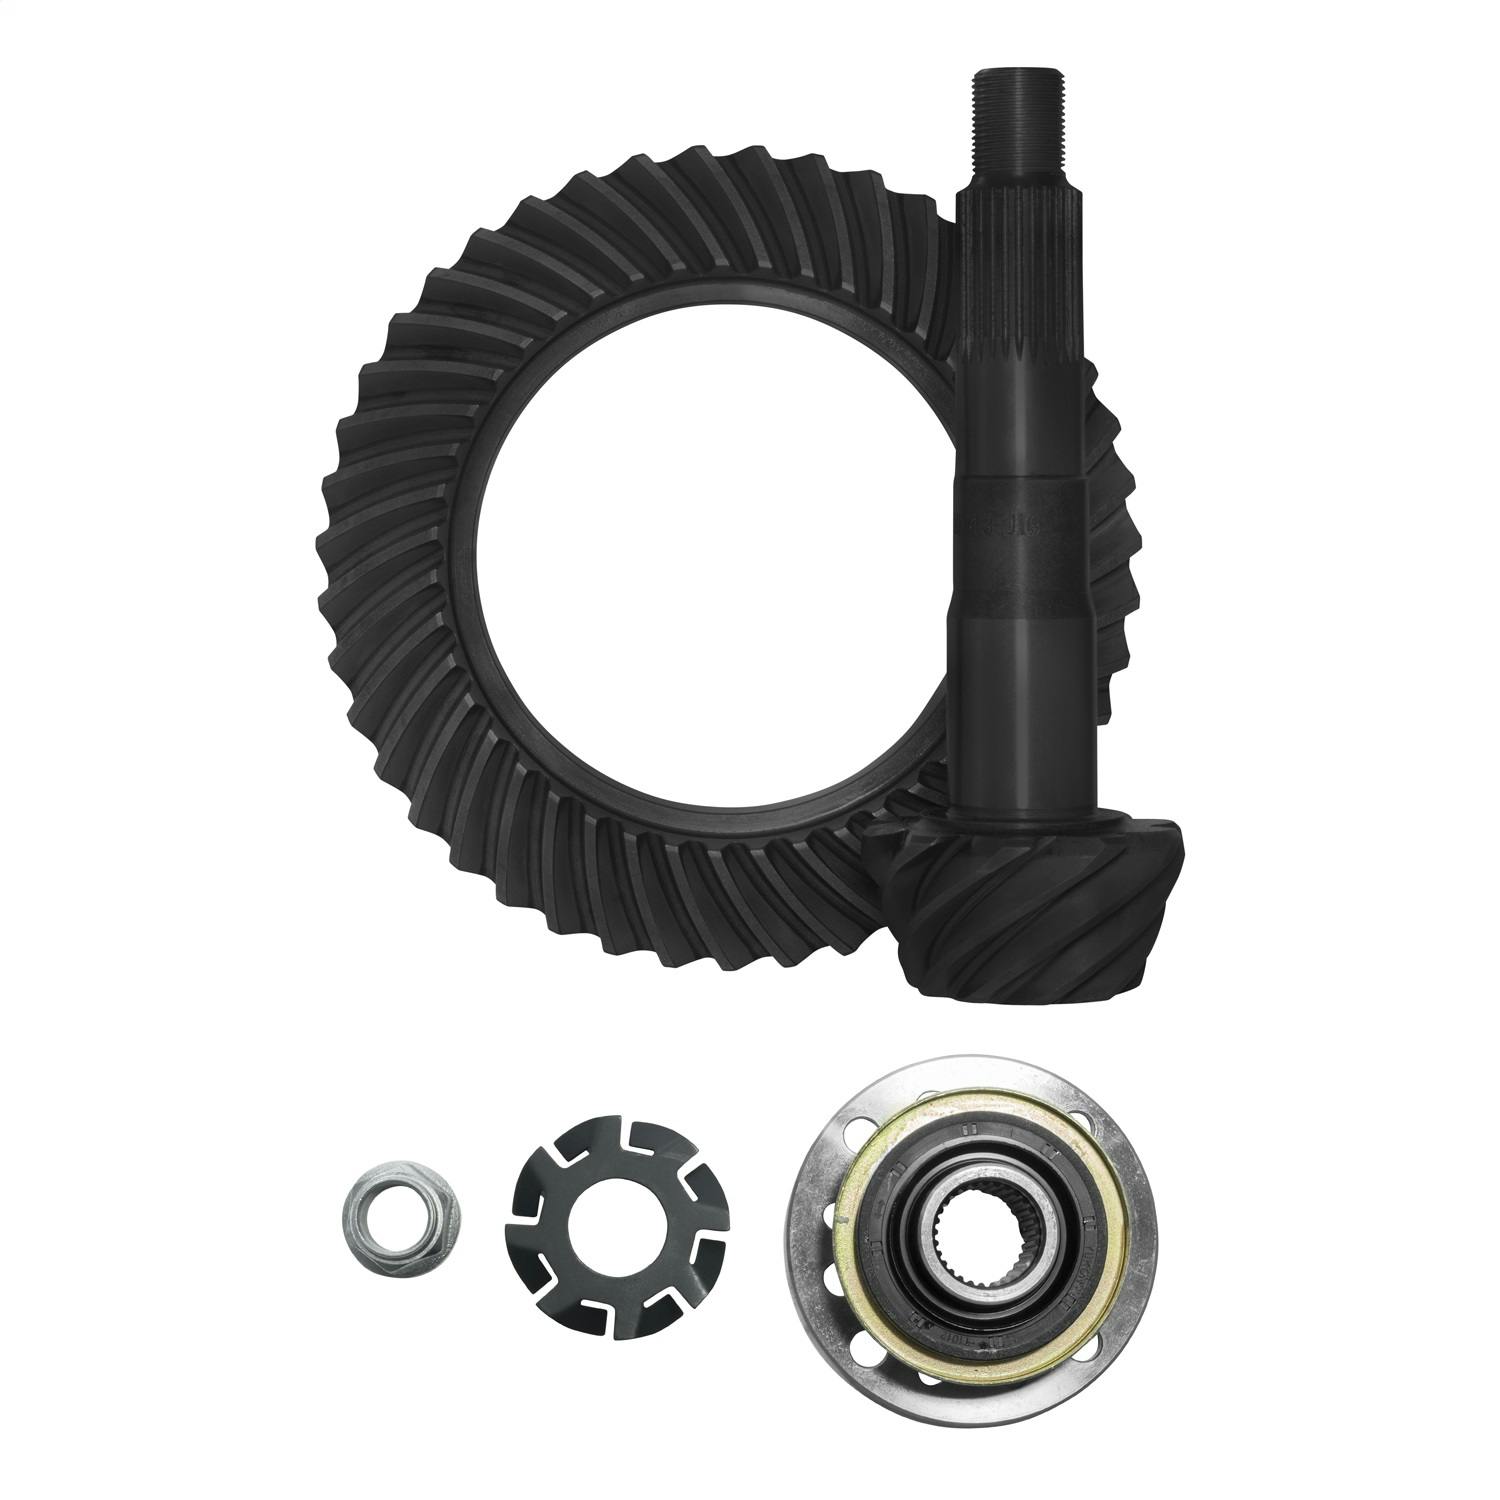 USA Standard Gear ZG TLCF-529RK Differential Ring and Pinion